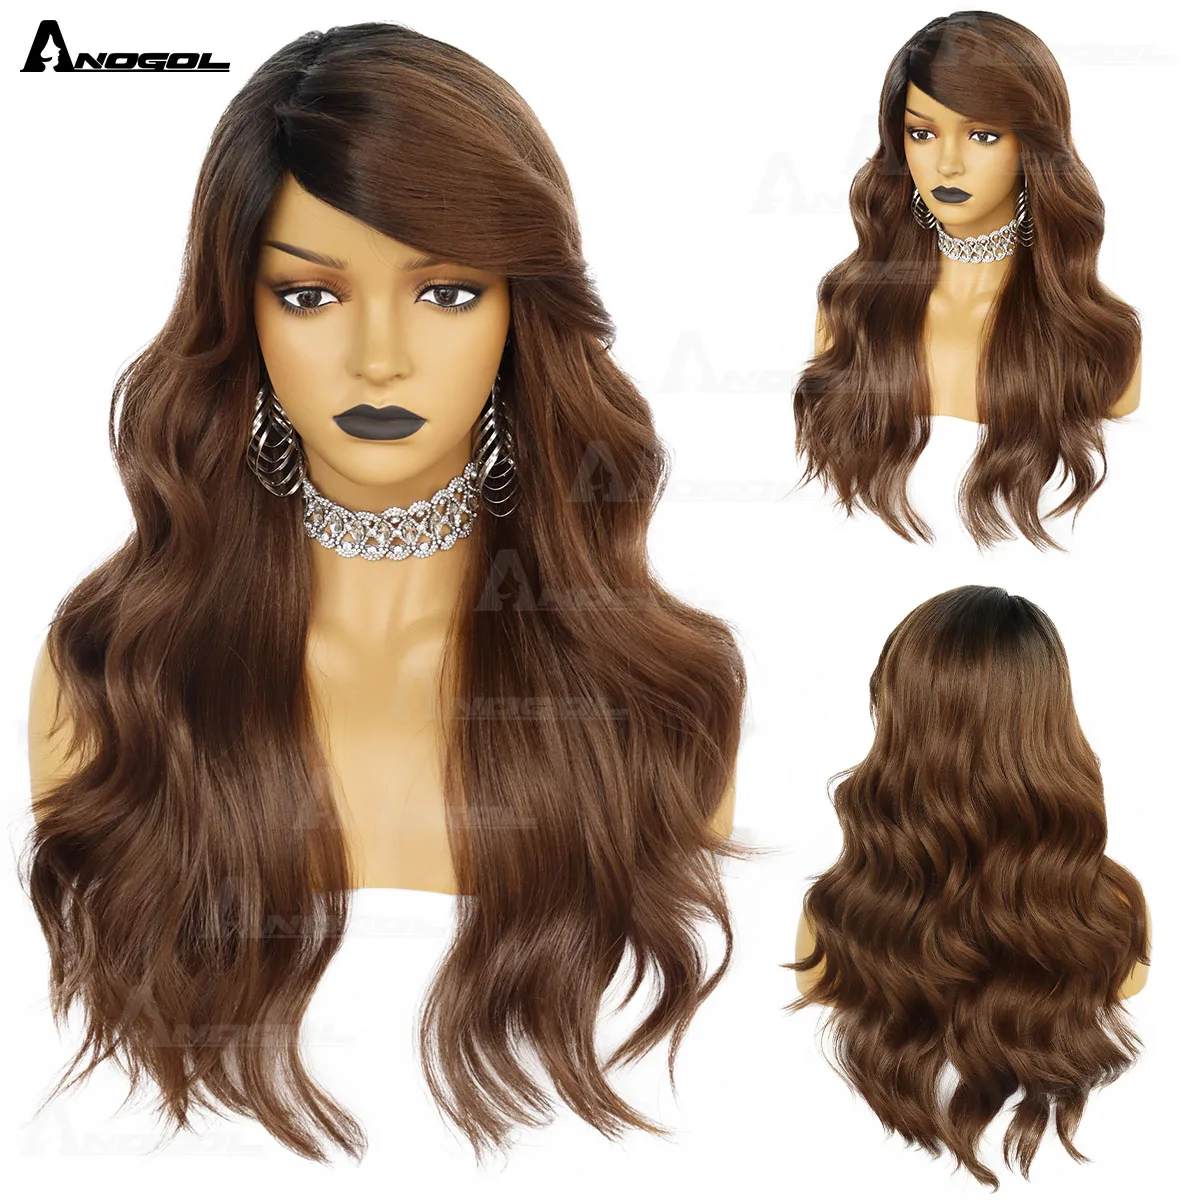 

AN Synthetic 24inch Long Body Wavy Black Red Hair with Inclined Bang Wigs Multi-color Rose Hairnet Cosplay Wig for Black Women